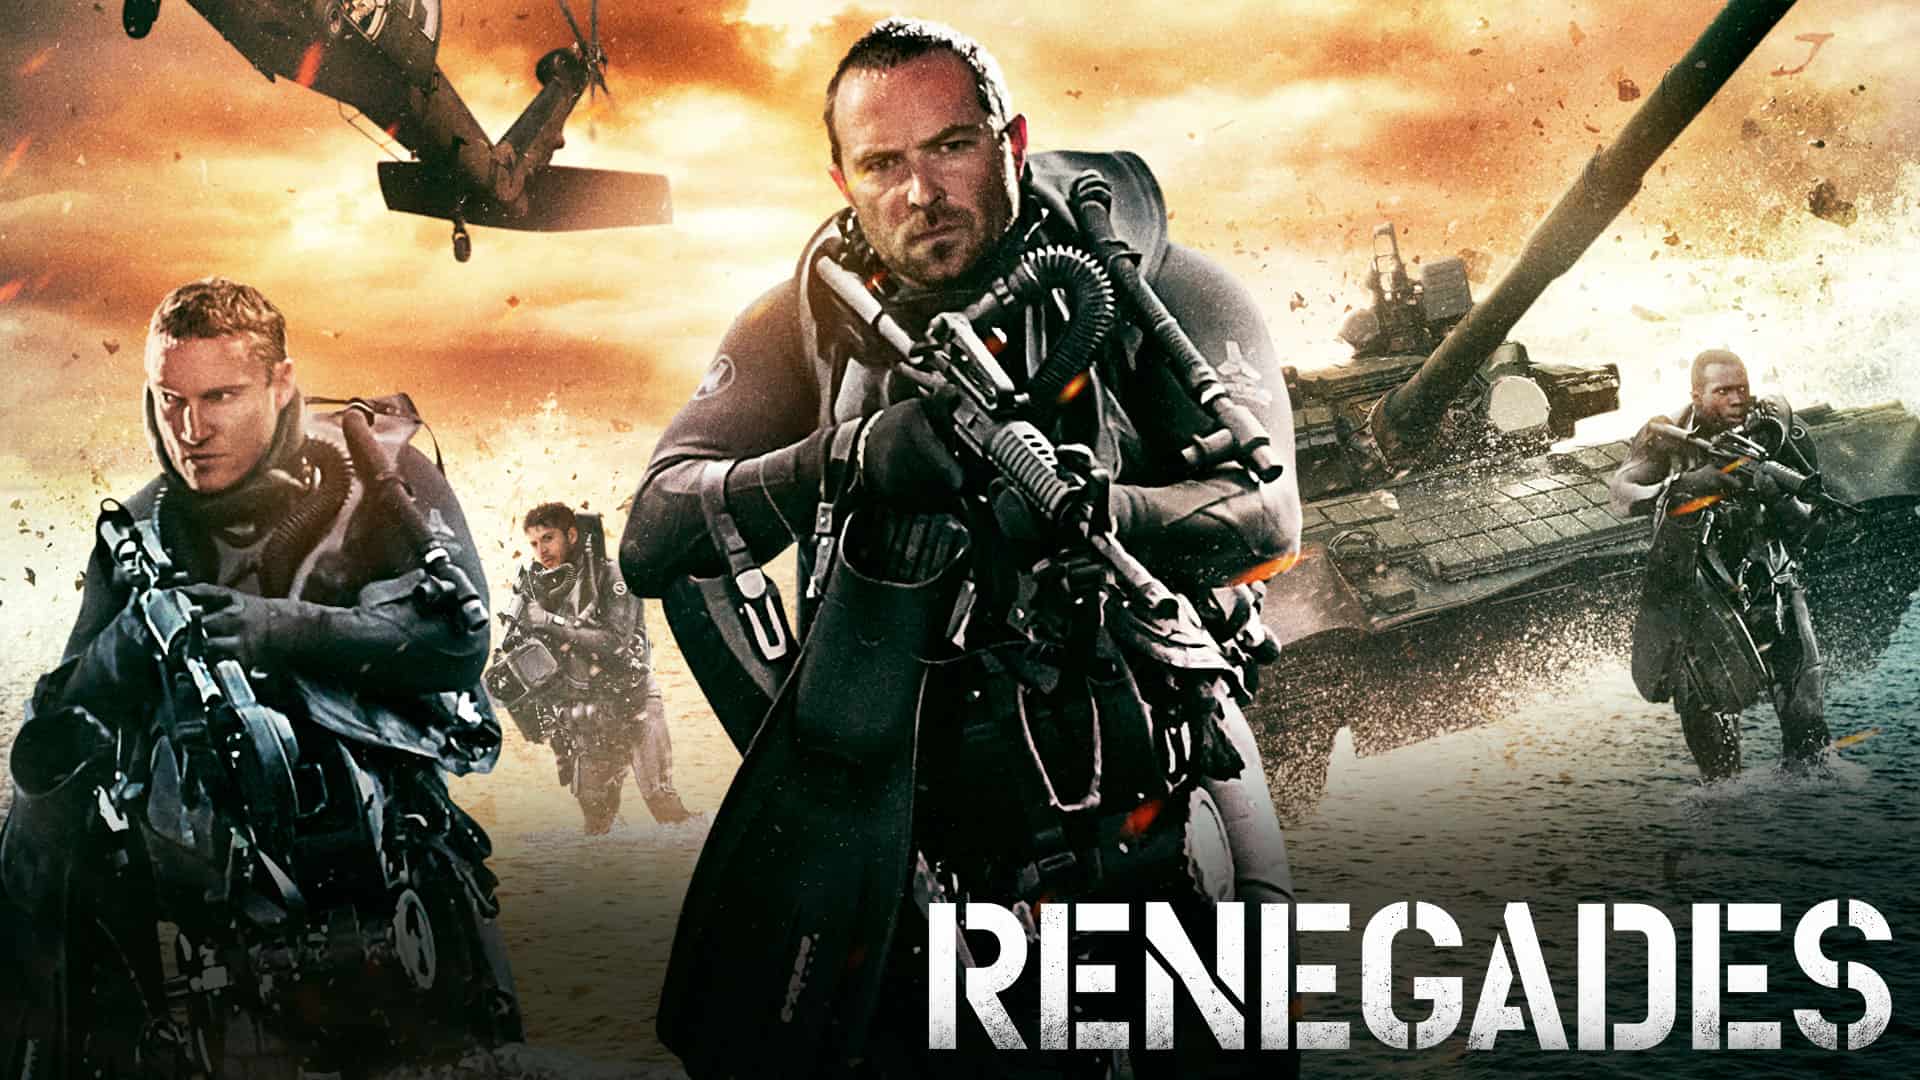 Renegades Movie Poster 2017 Wallpapers